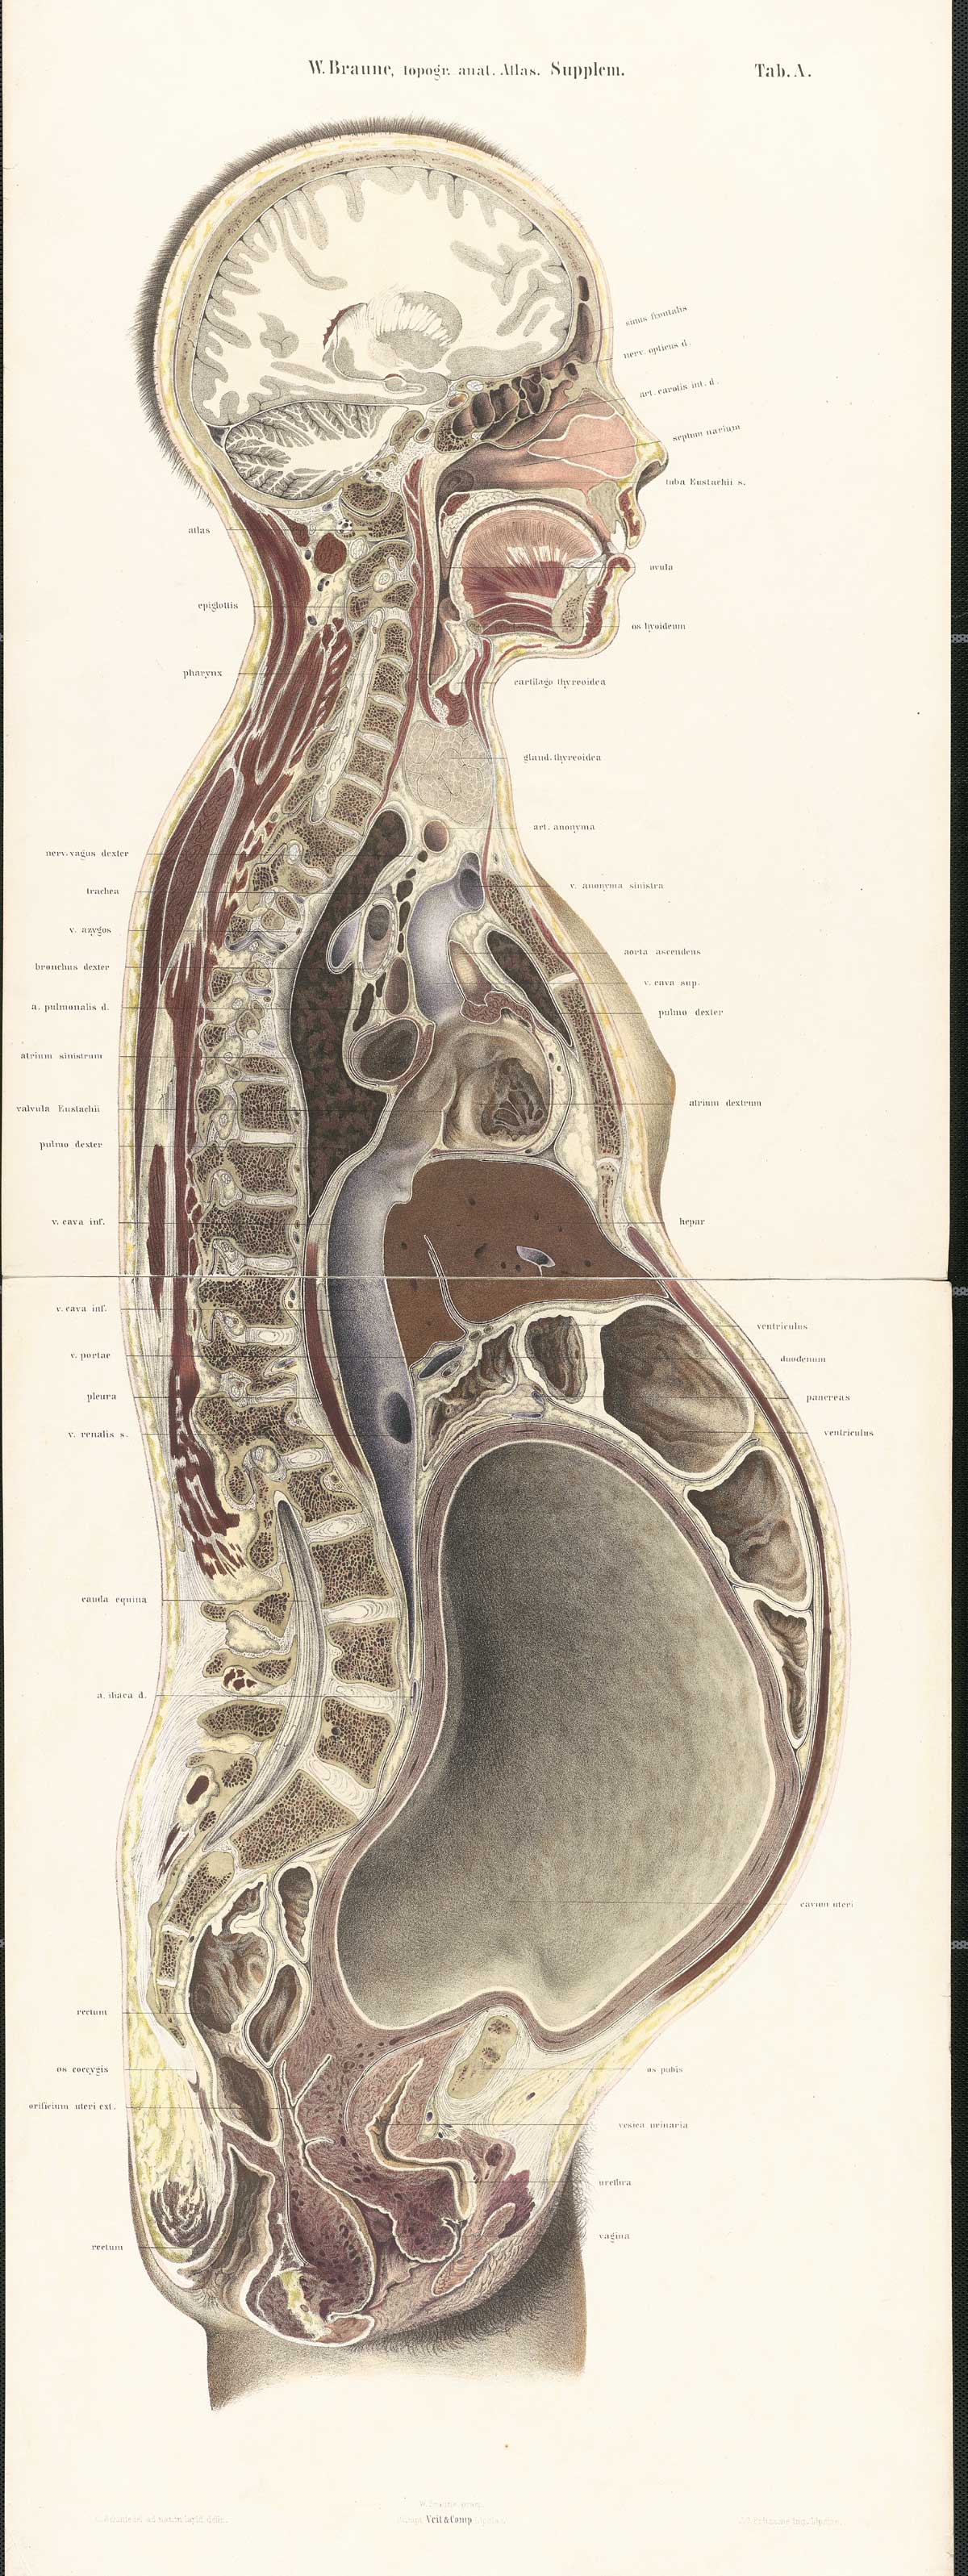 Chromolithograph of pregnant female body cross-section with the subject facing to the right, showing all structures and internal organs of the head, thorax, and abdomen, including empty womb nearly to term, from Wilhelm Braune’s Die Lage des Uterus und Foetus Ende der Schwangerschaft, nach durchschnitten an Gefrornen Cadavern, Leipzig, 1872.